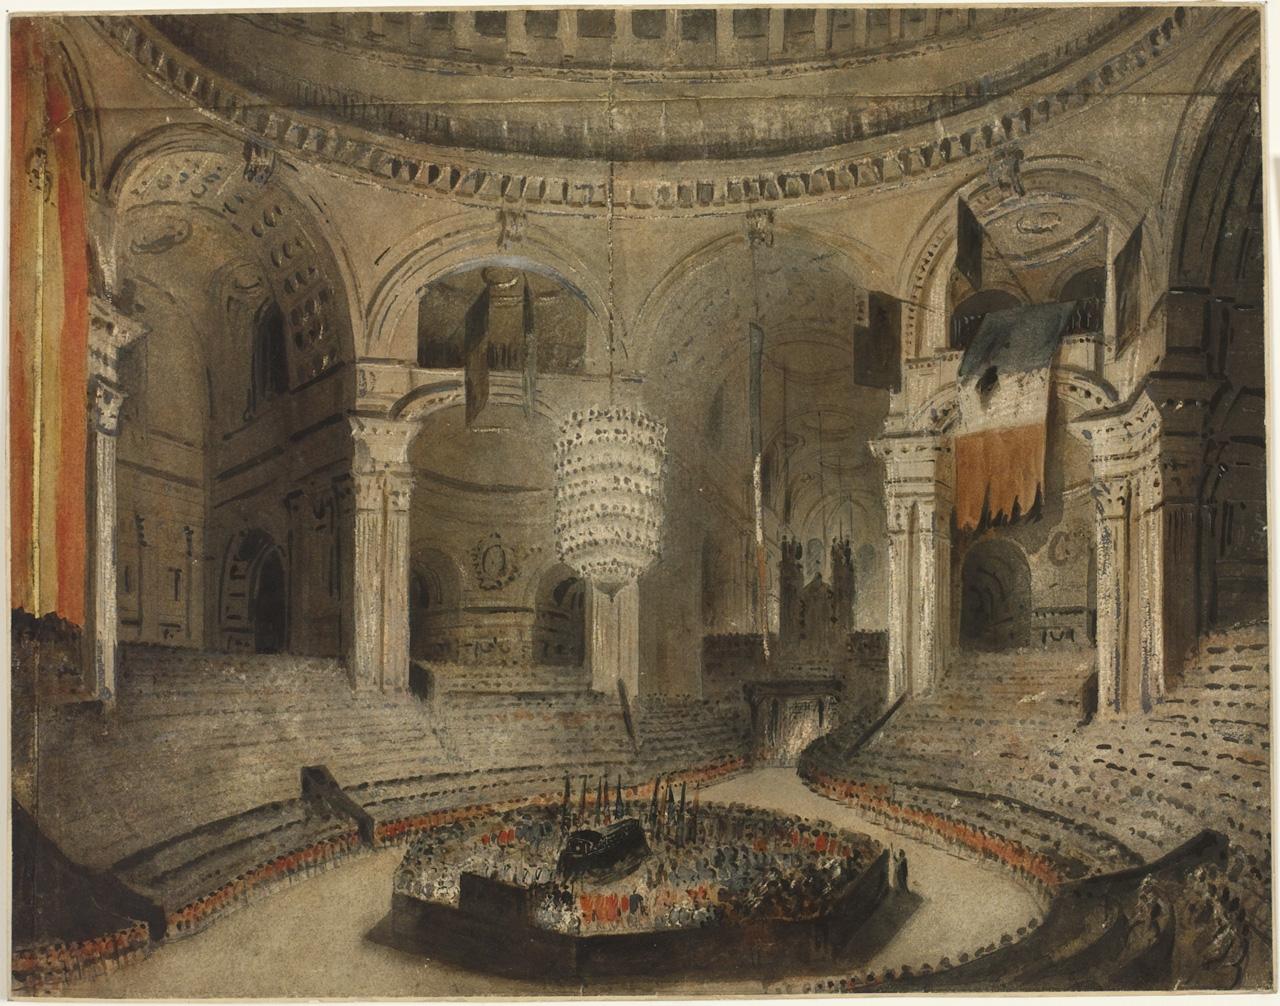 An image showing 'Painting of interment of Nelson at St Paul's, with ensign visible on left'